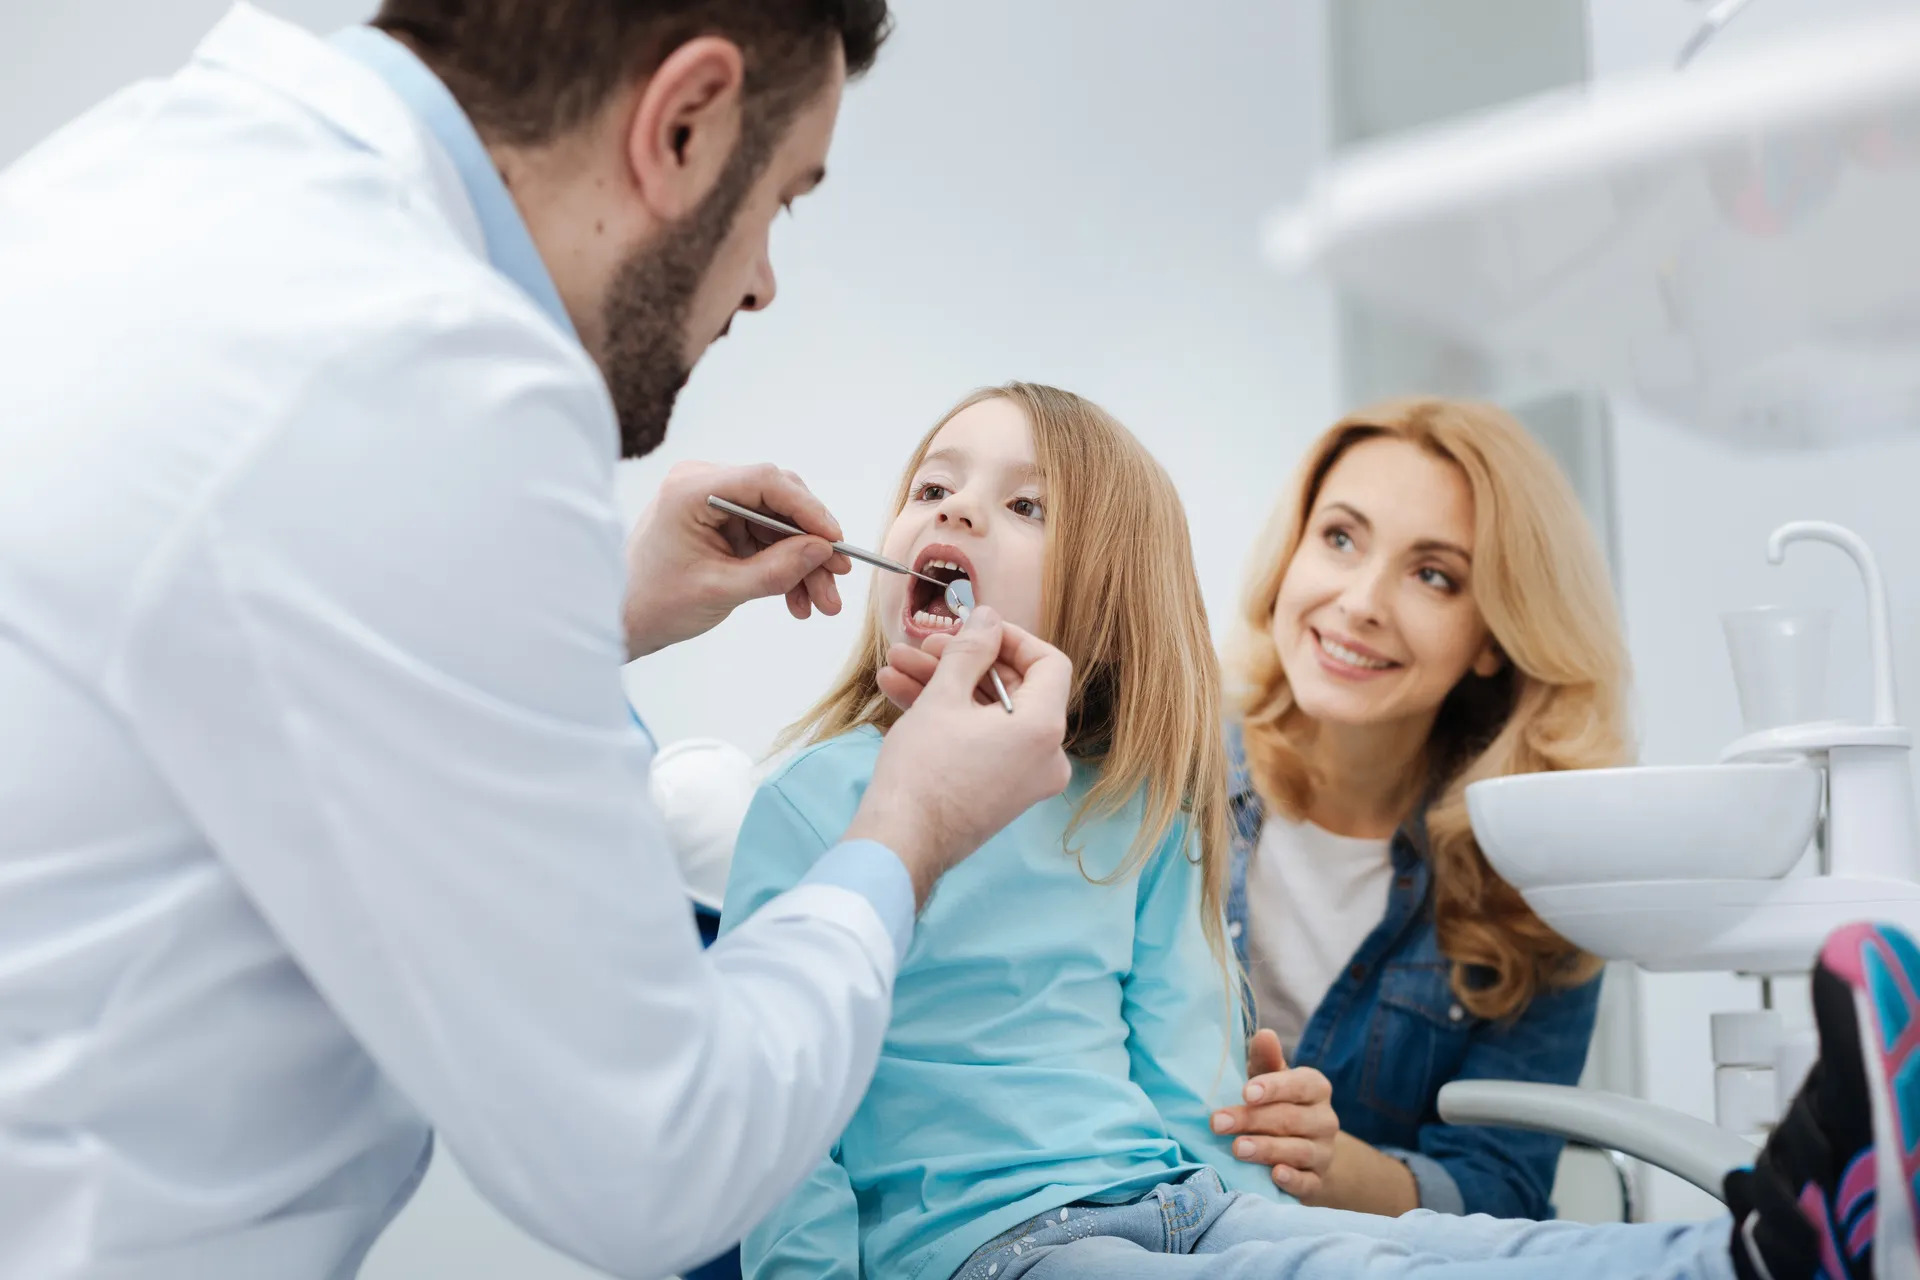 How have you prioritized families when it comes to dental care?